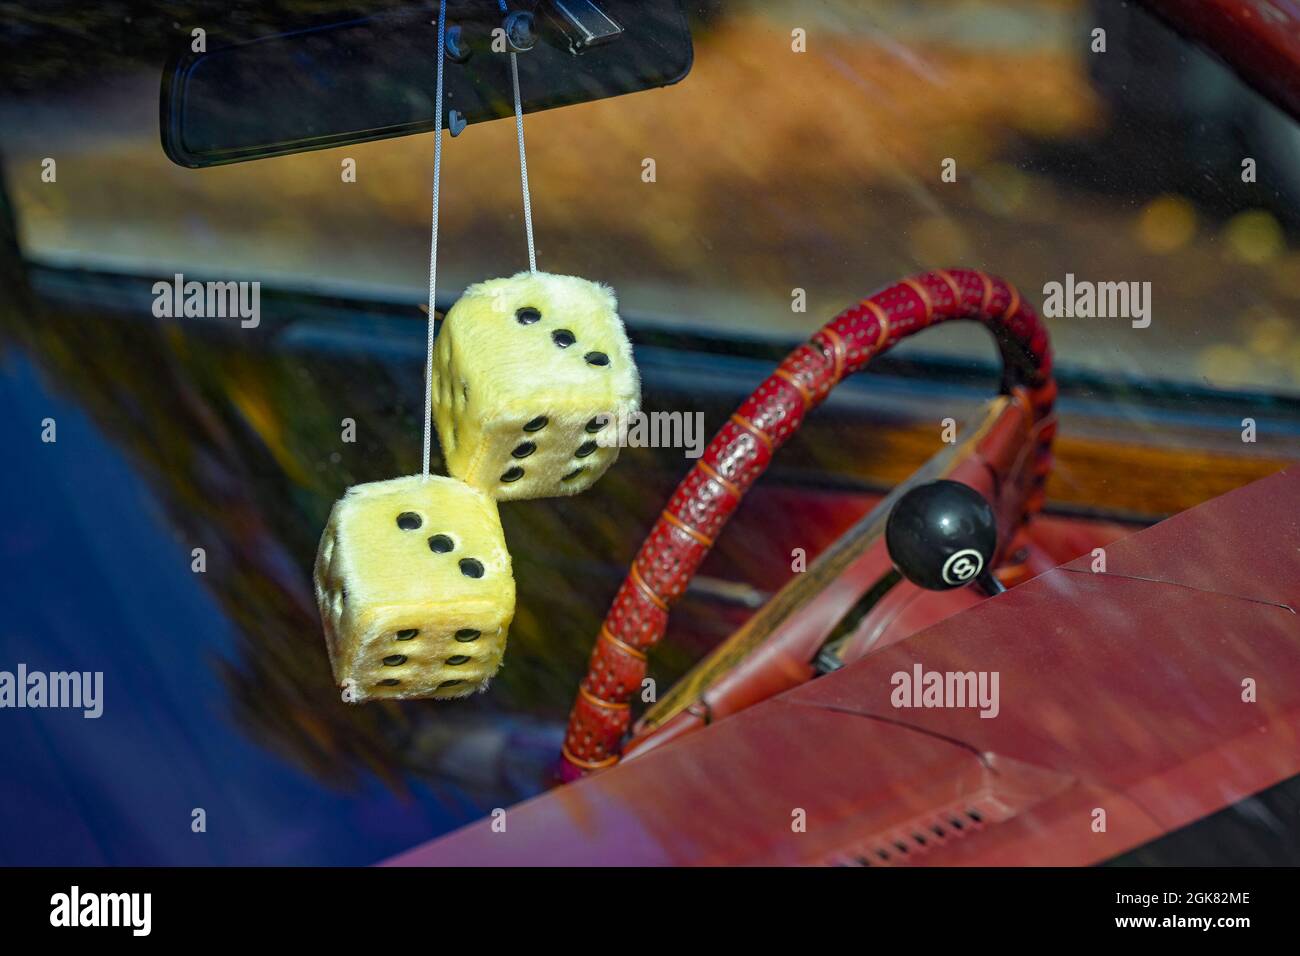 Furry dice hanging from car rear view mirror Stock Photo